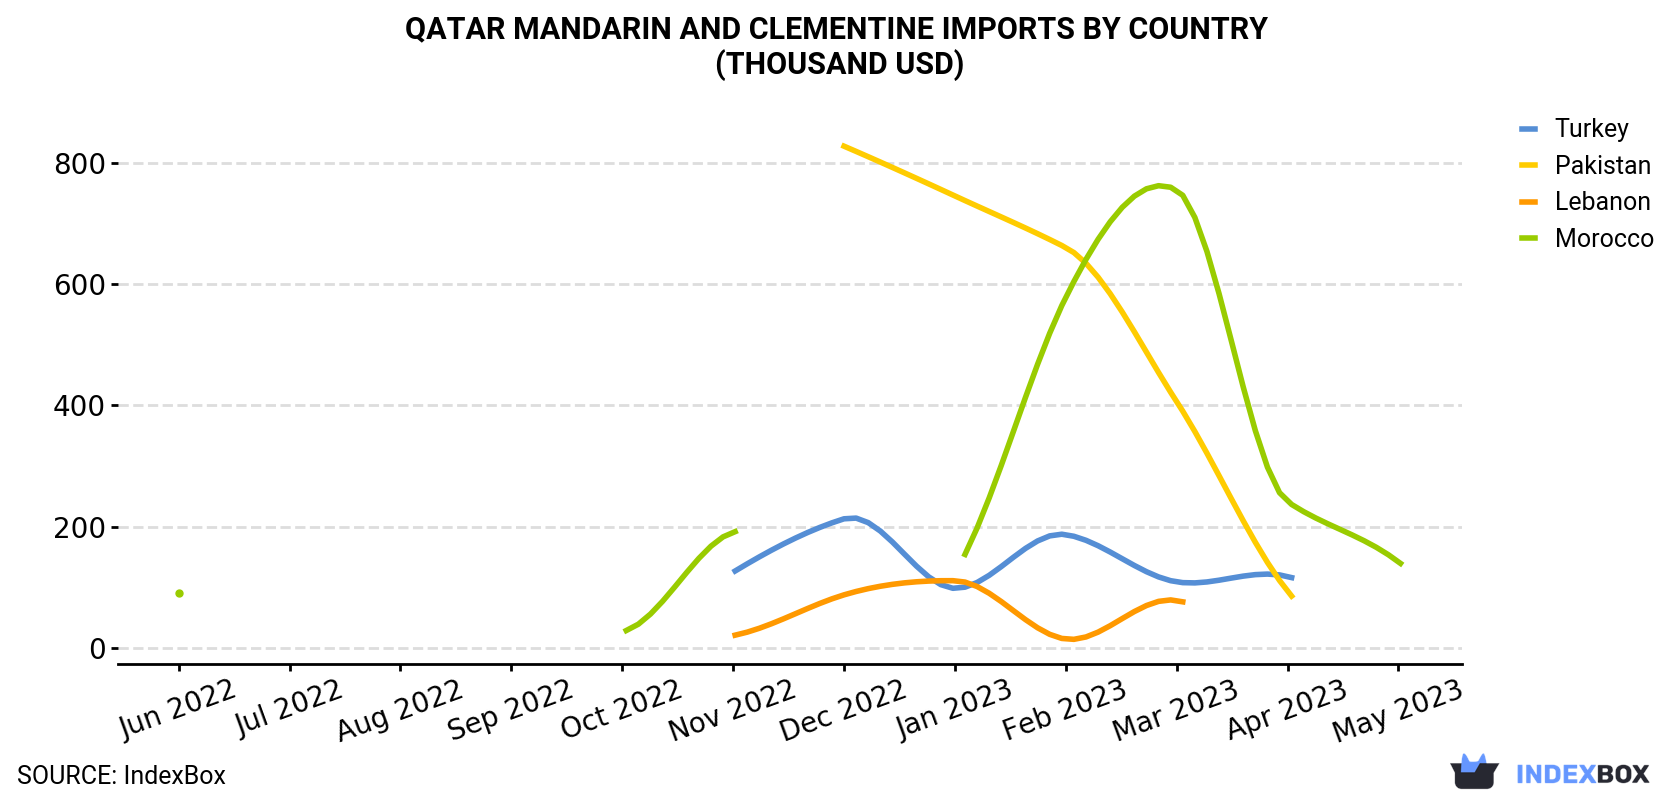 Qatar Mandarin and Clementine Imports By Country (Thousand USD)